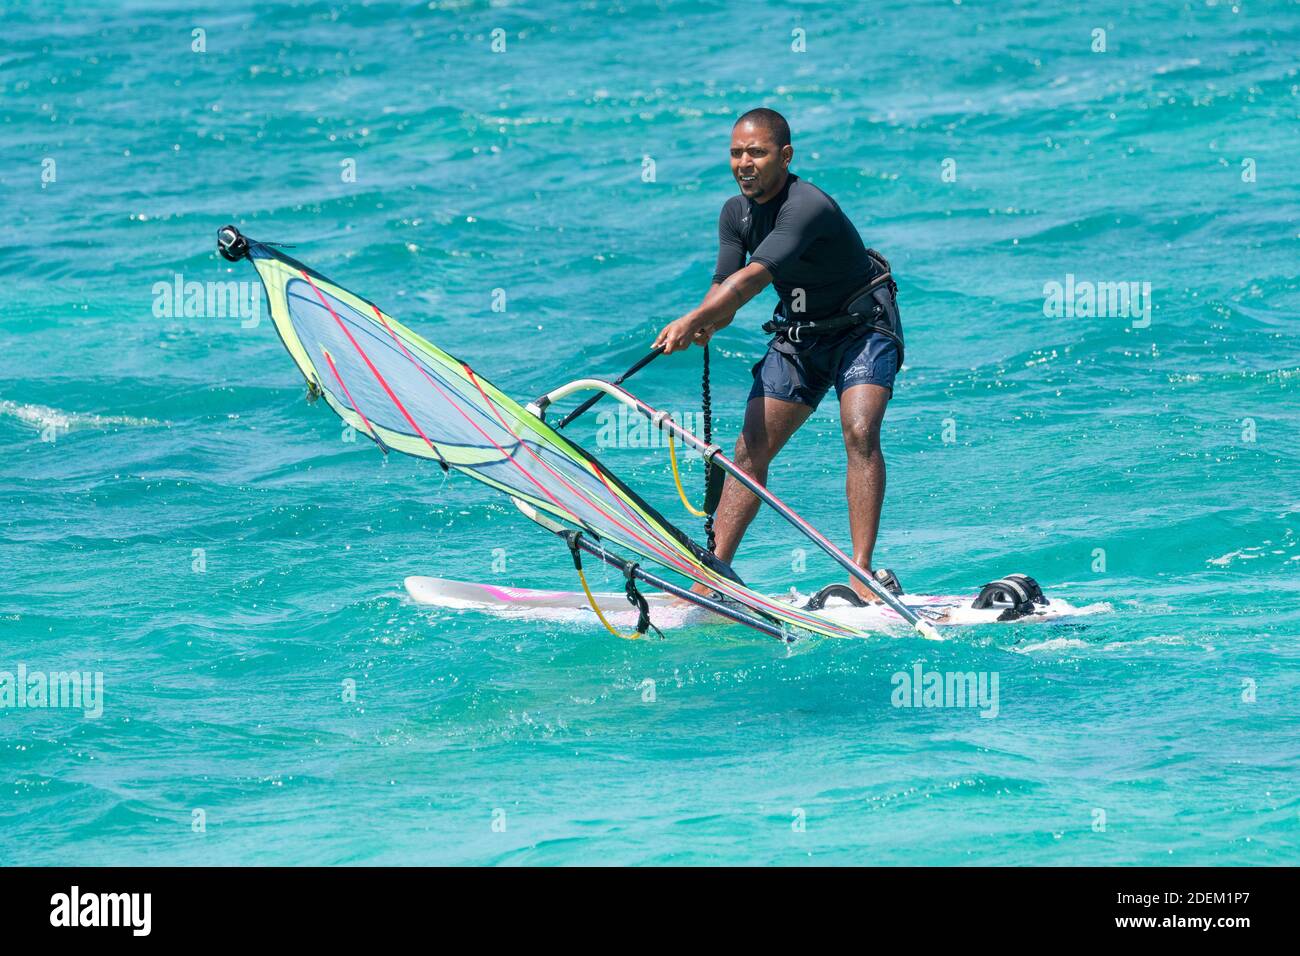 windsurfer in a wetsuit pulling up a sail out of the turquoise blue sea water on the tropical island of Mauritius concept lifestyle sport, recreation Stock Photo